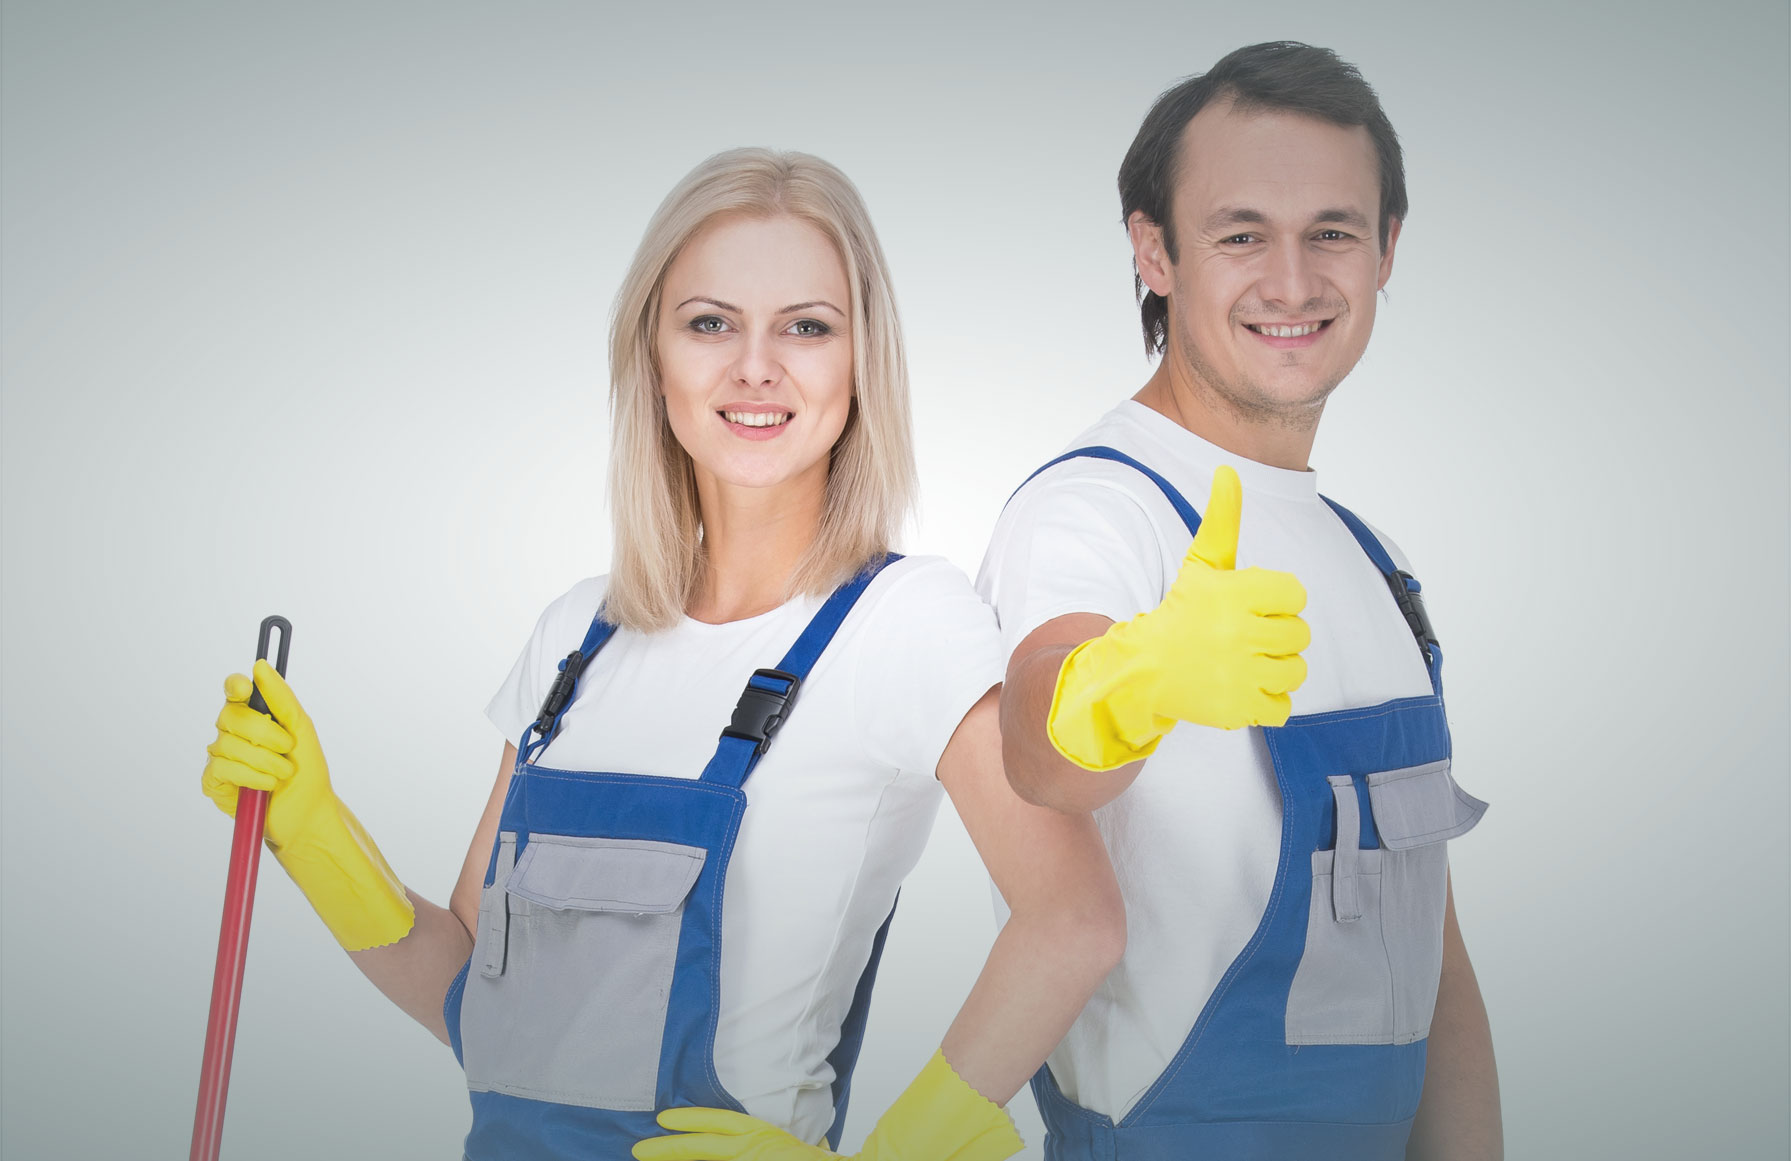 Cleaning Uniforms from Layan, UAE